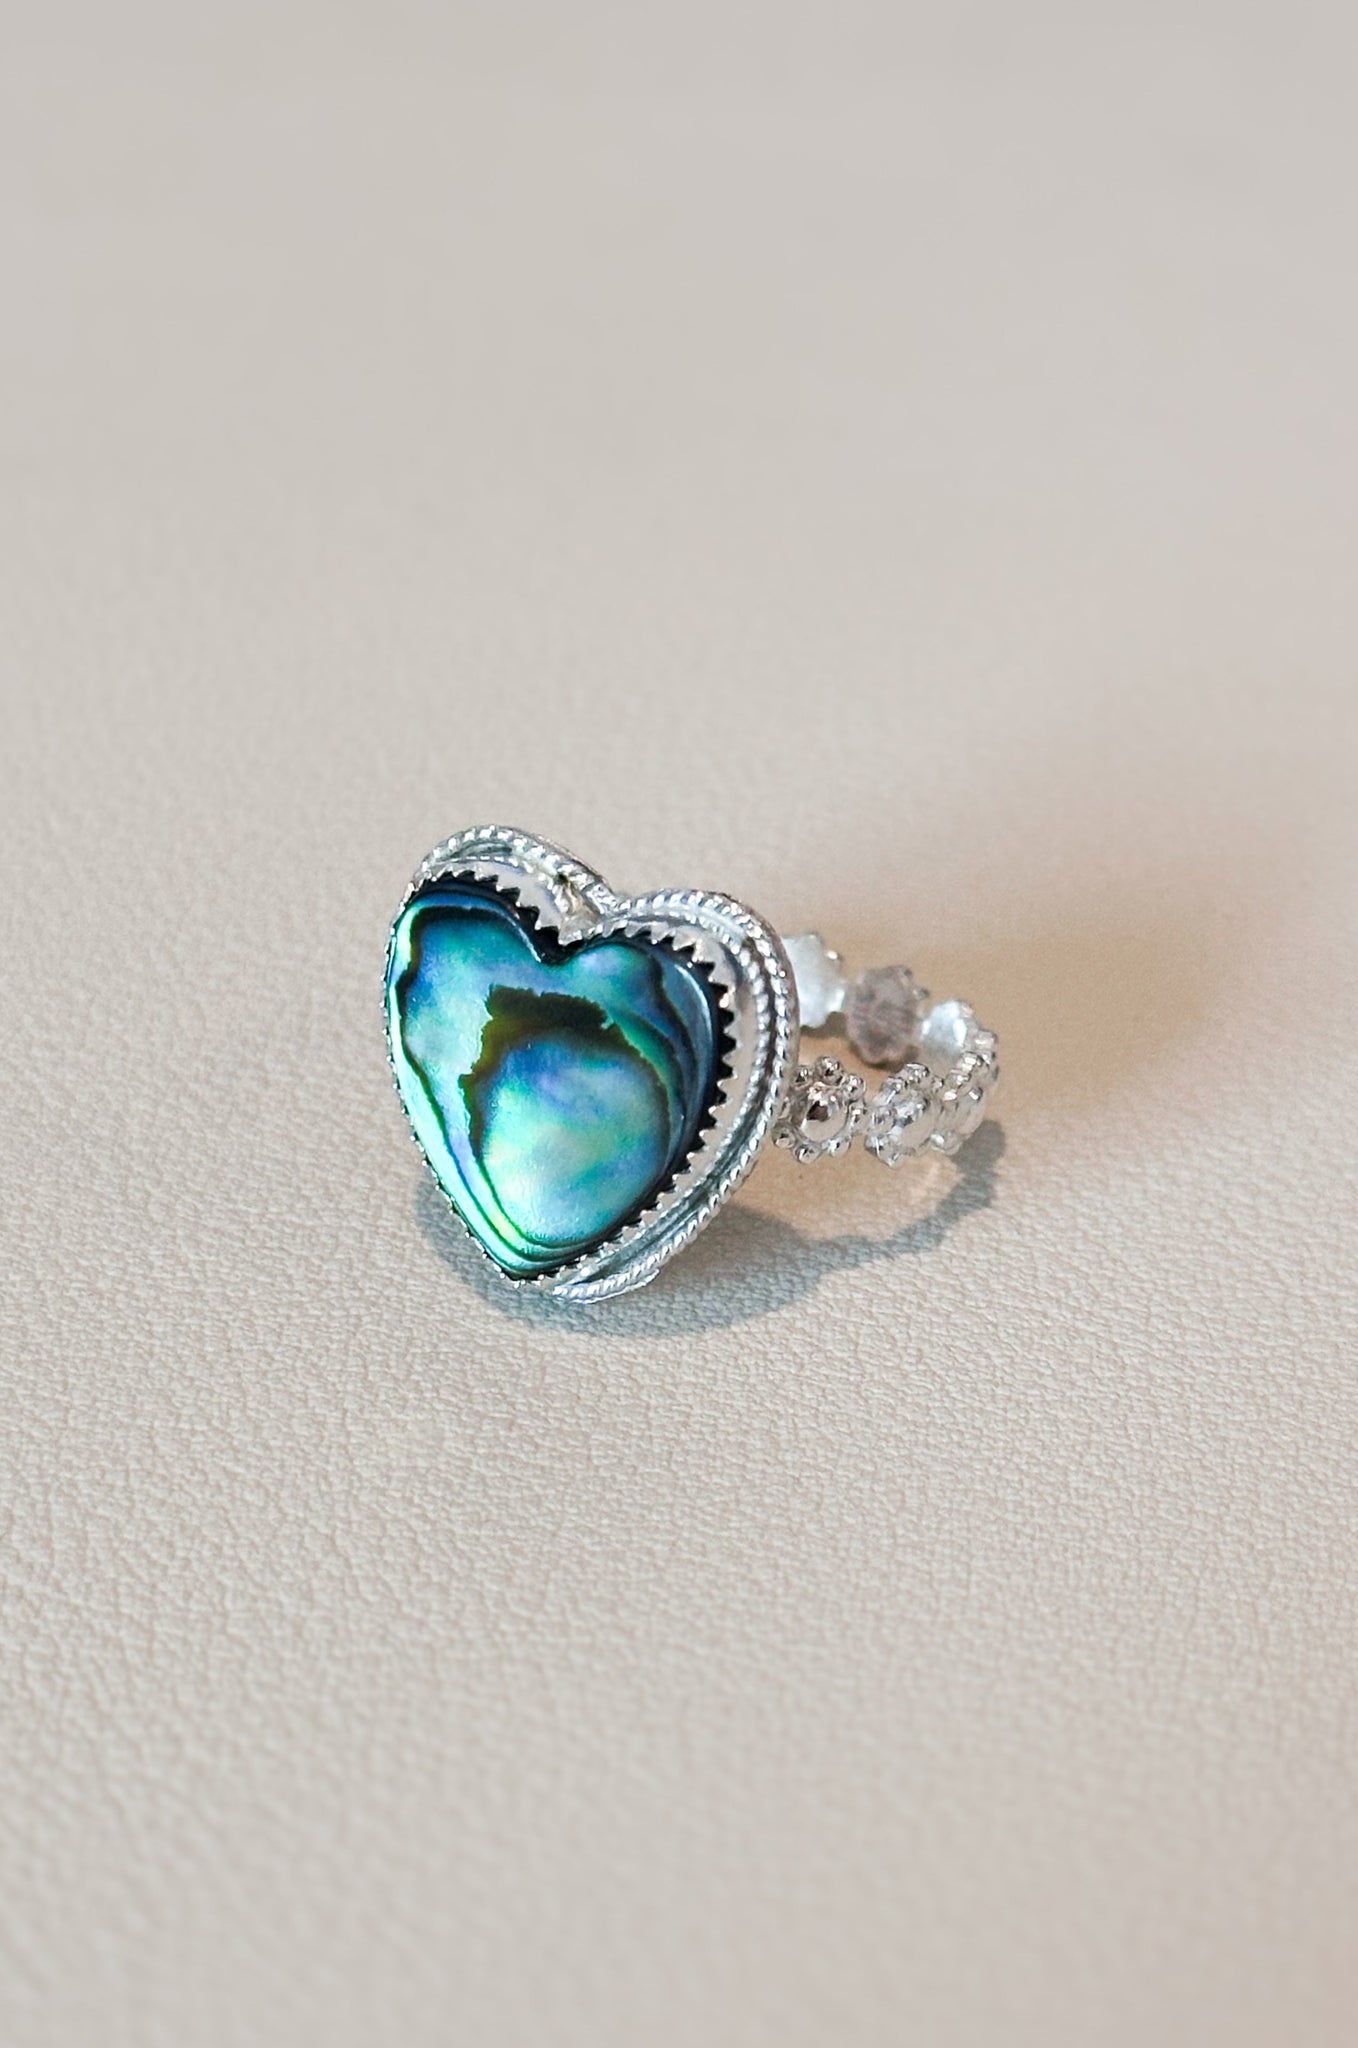 Abalone Heart Ring - Ready to Ship Size 8